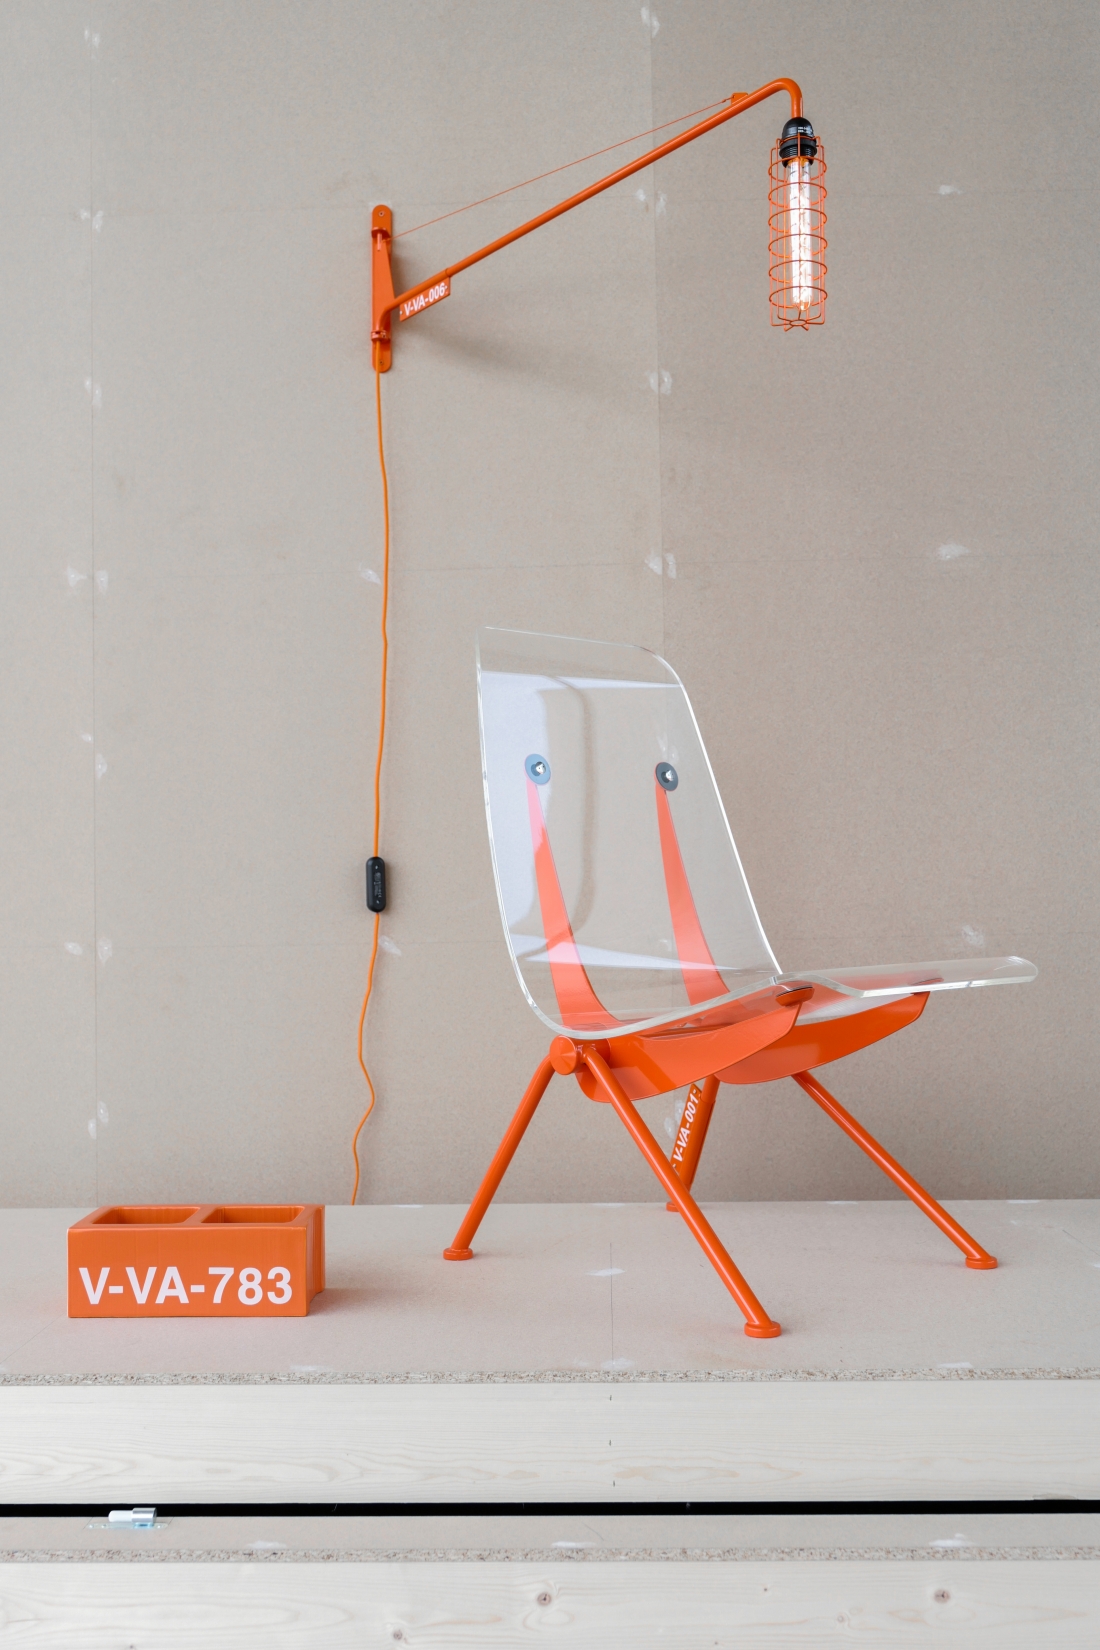 the virgil abloh c/o VITRA collection explores the urgent need for